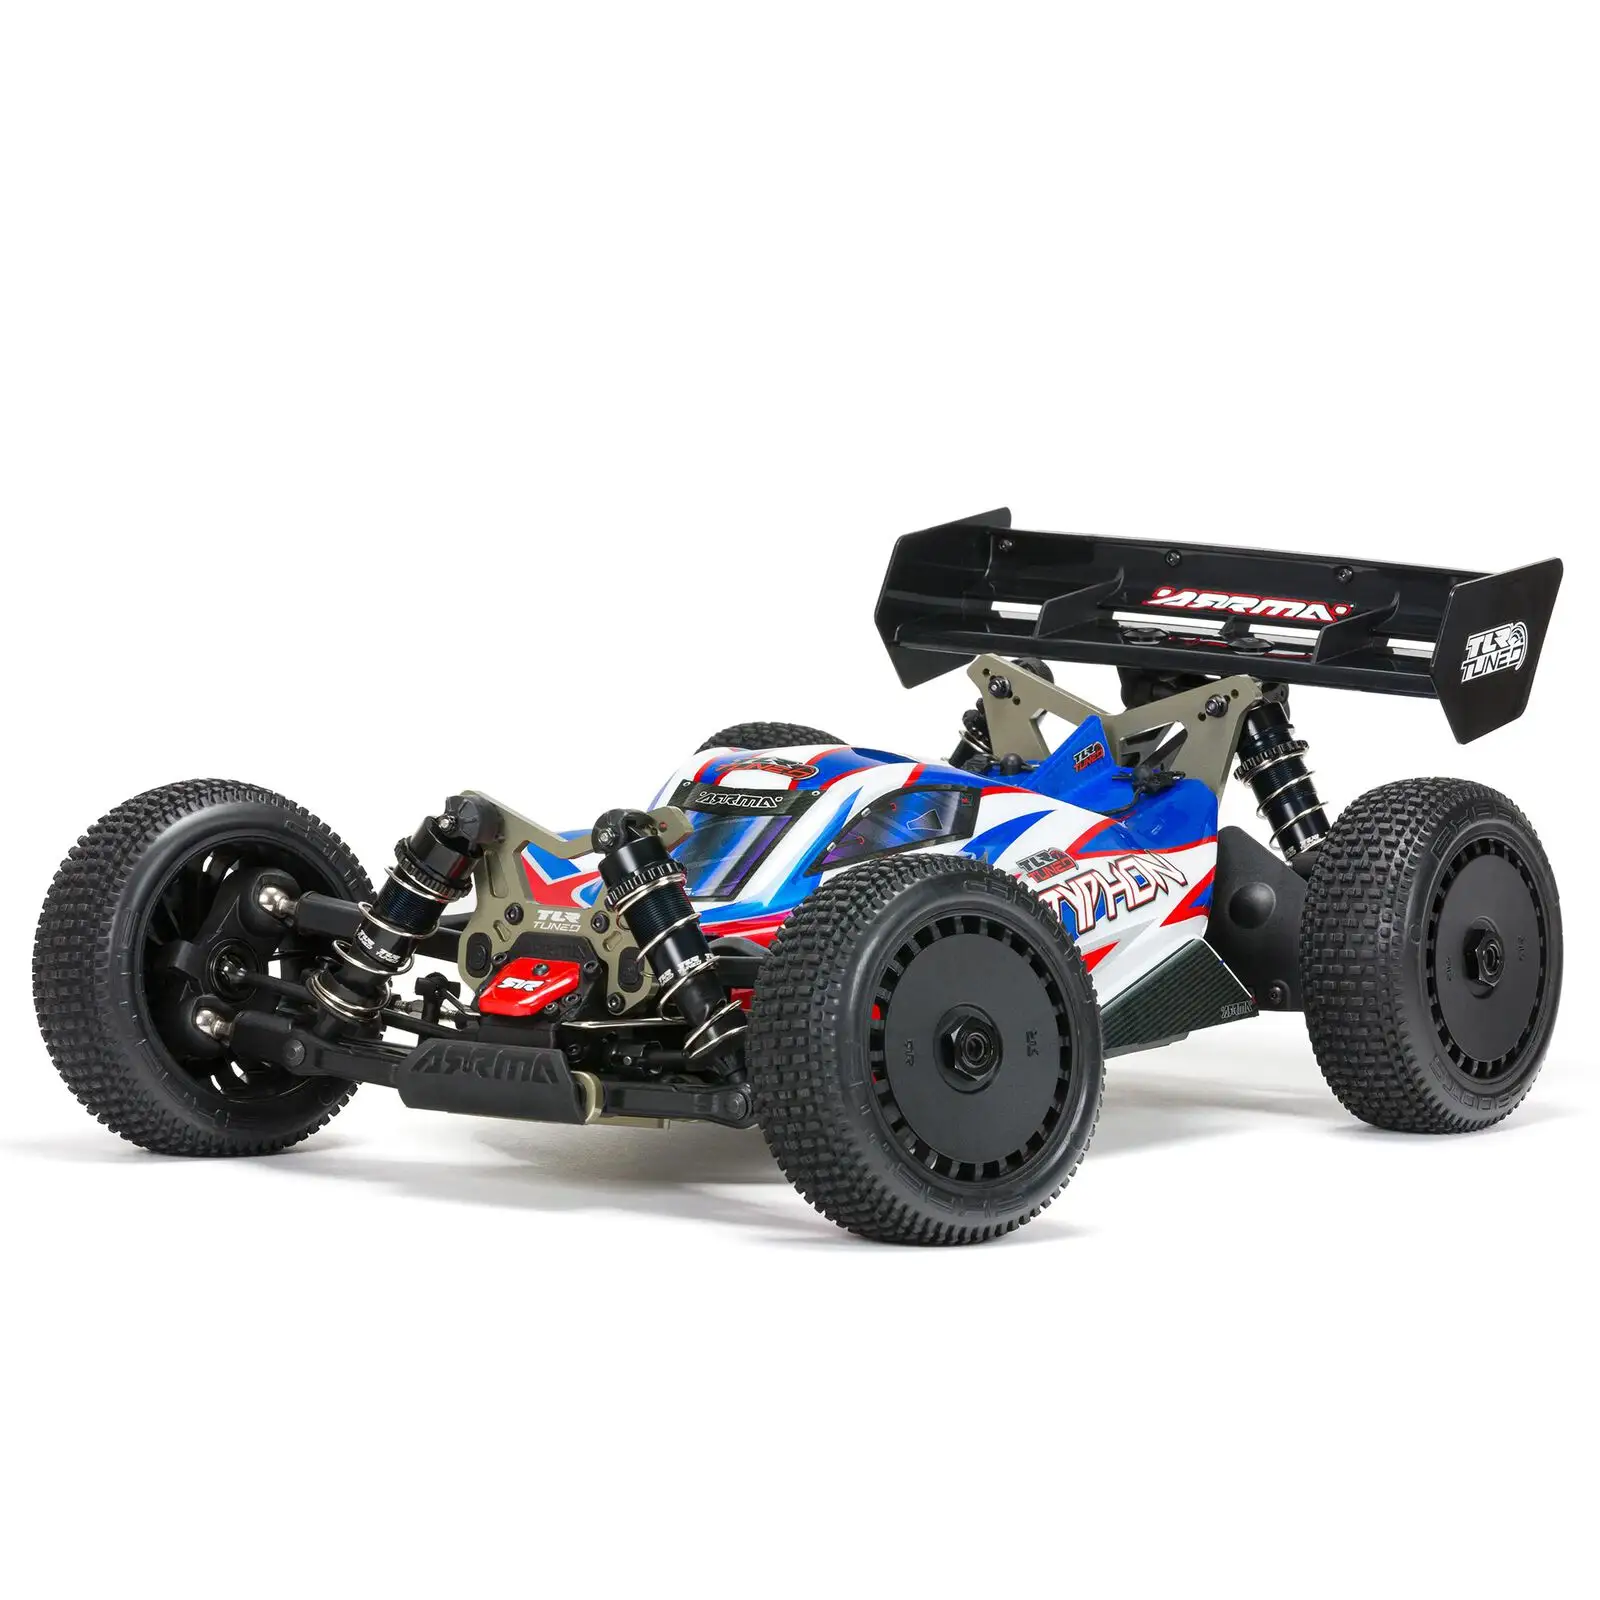 BEST PRICE For New 1/8 TLR Tuned TYPHON 6S 4X4 BLX Buggy RTR, Red/Blue